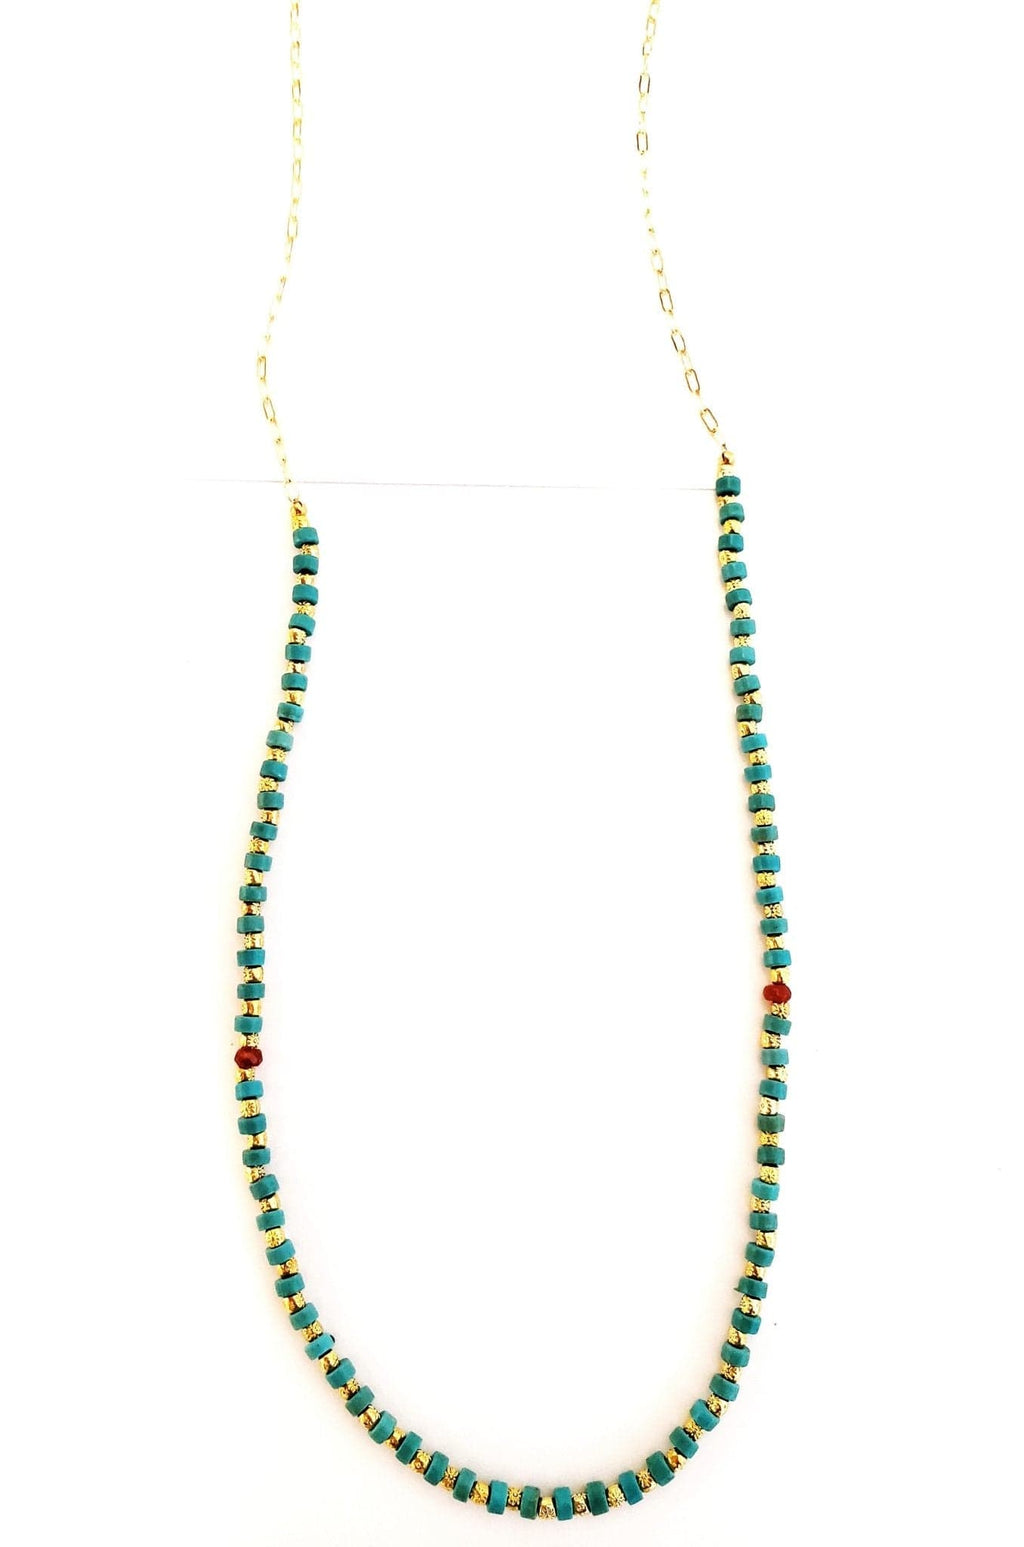 MINU Jewels Necklace Seti 24" Long Necklace in Turquoise, Gold Plated Accents, & Carnelian | MINU